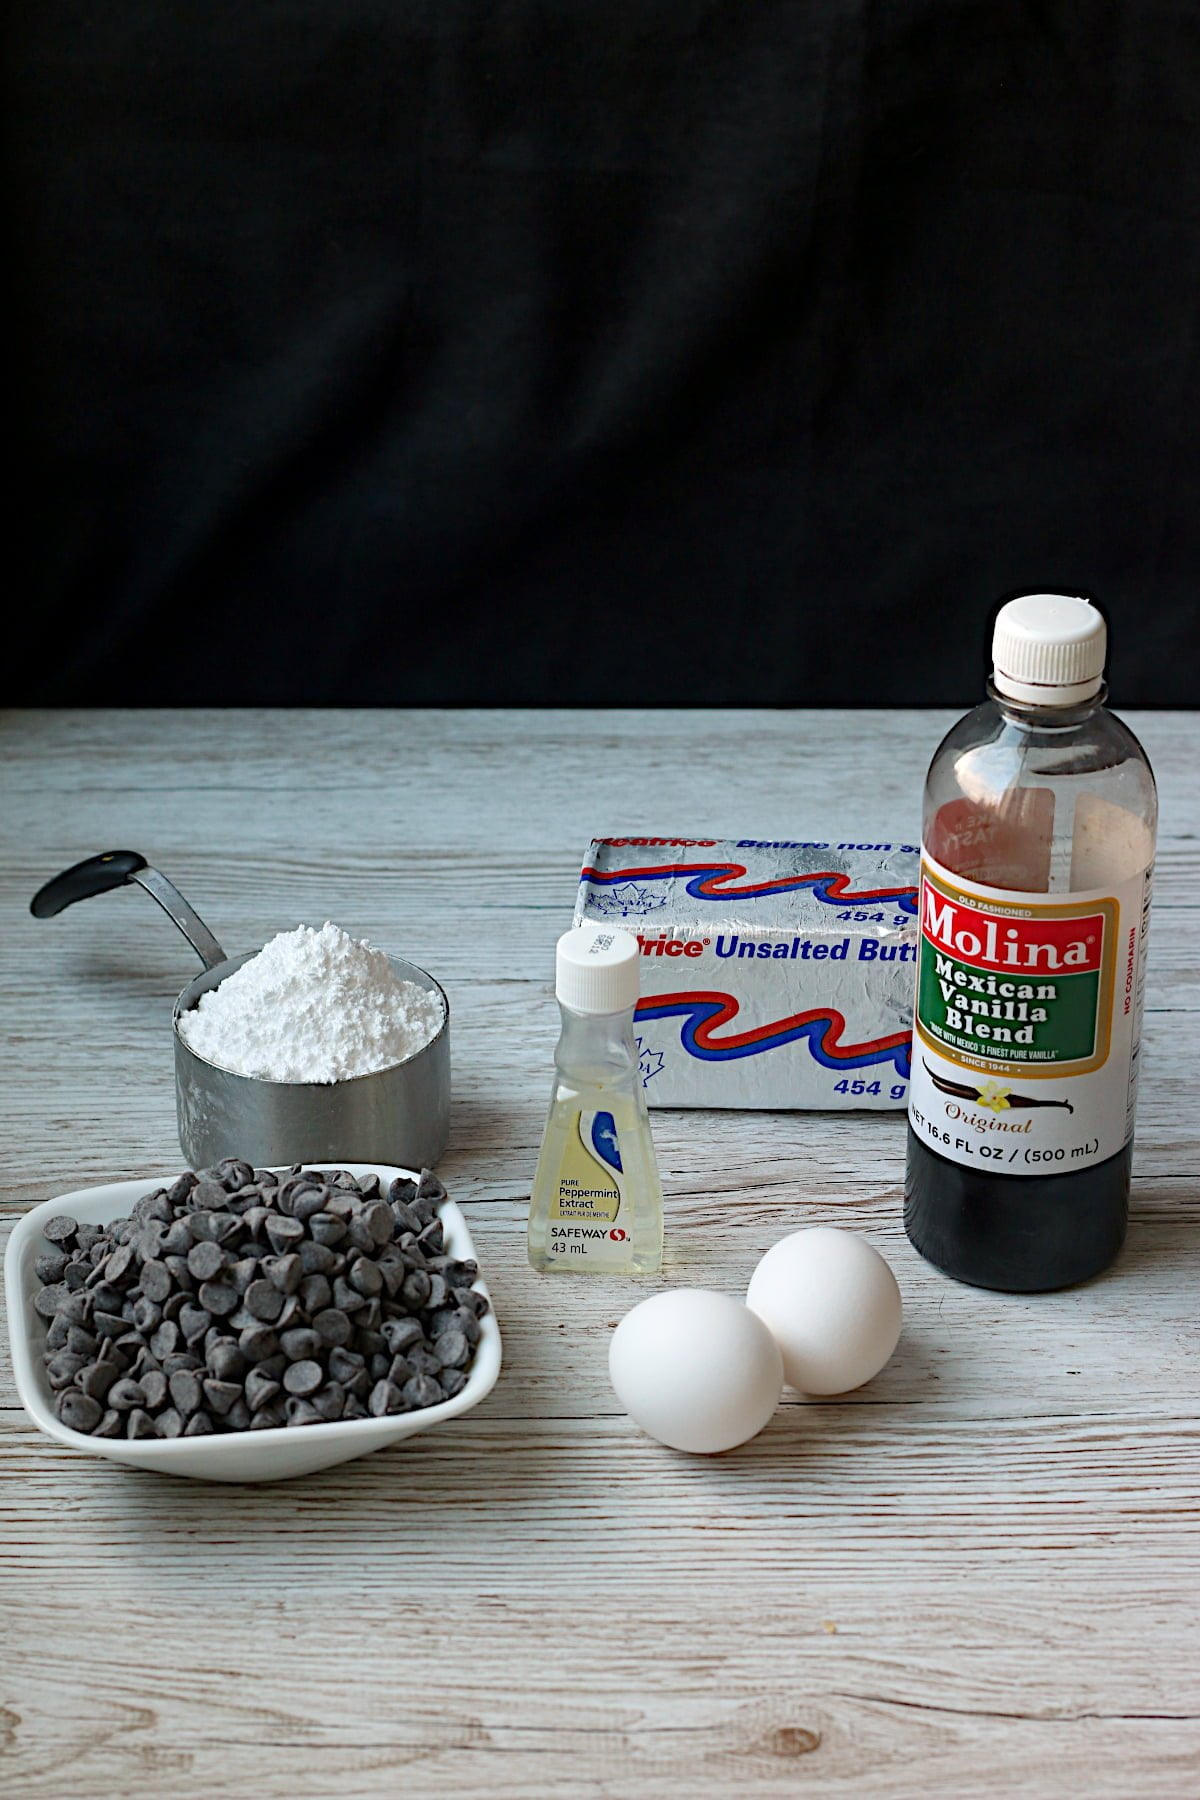 Copycat Frango Mint Ingredients - dark chocolate, powdered sugar, eggs, unsalted butter, vanilla, and peppermint extract.